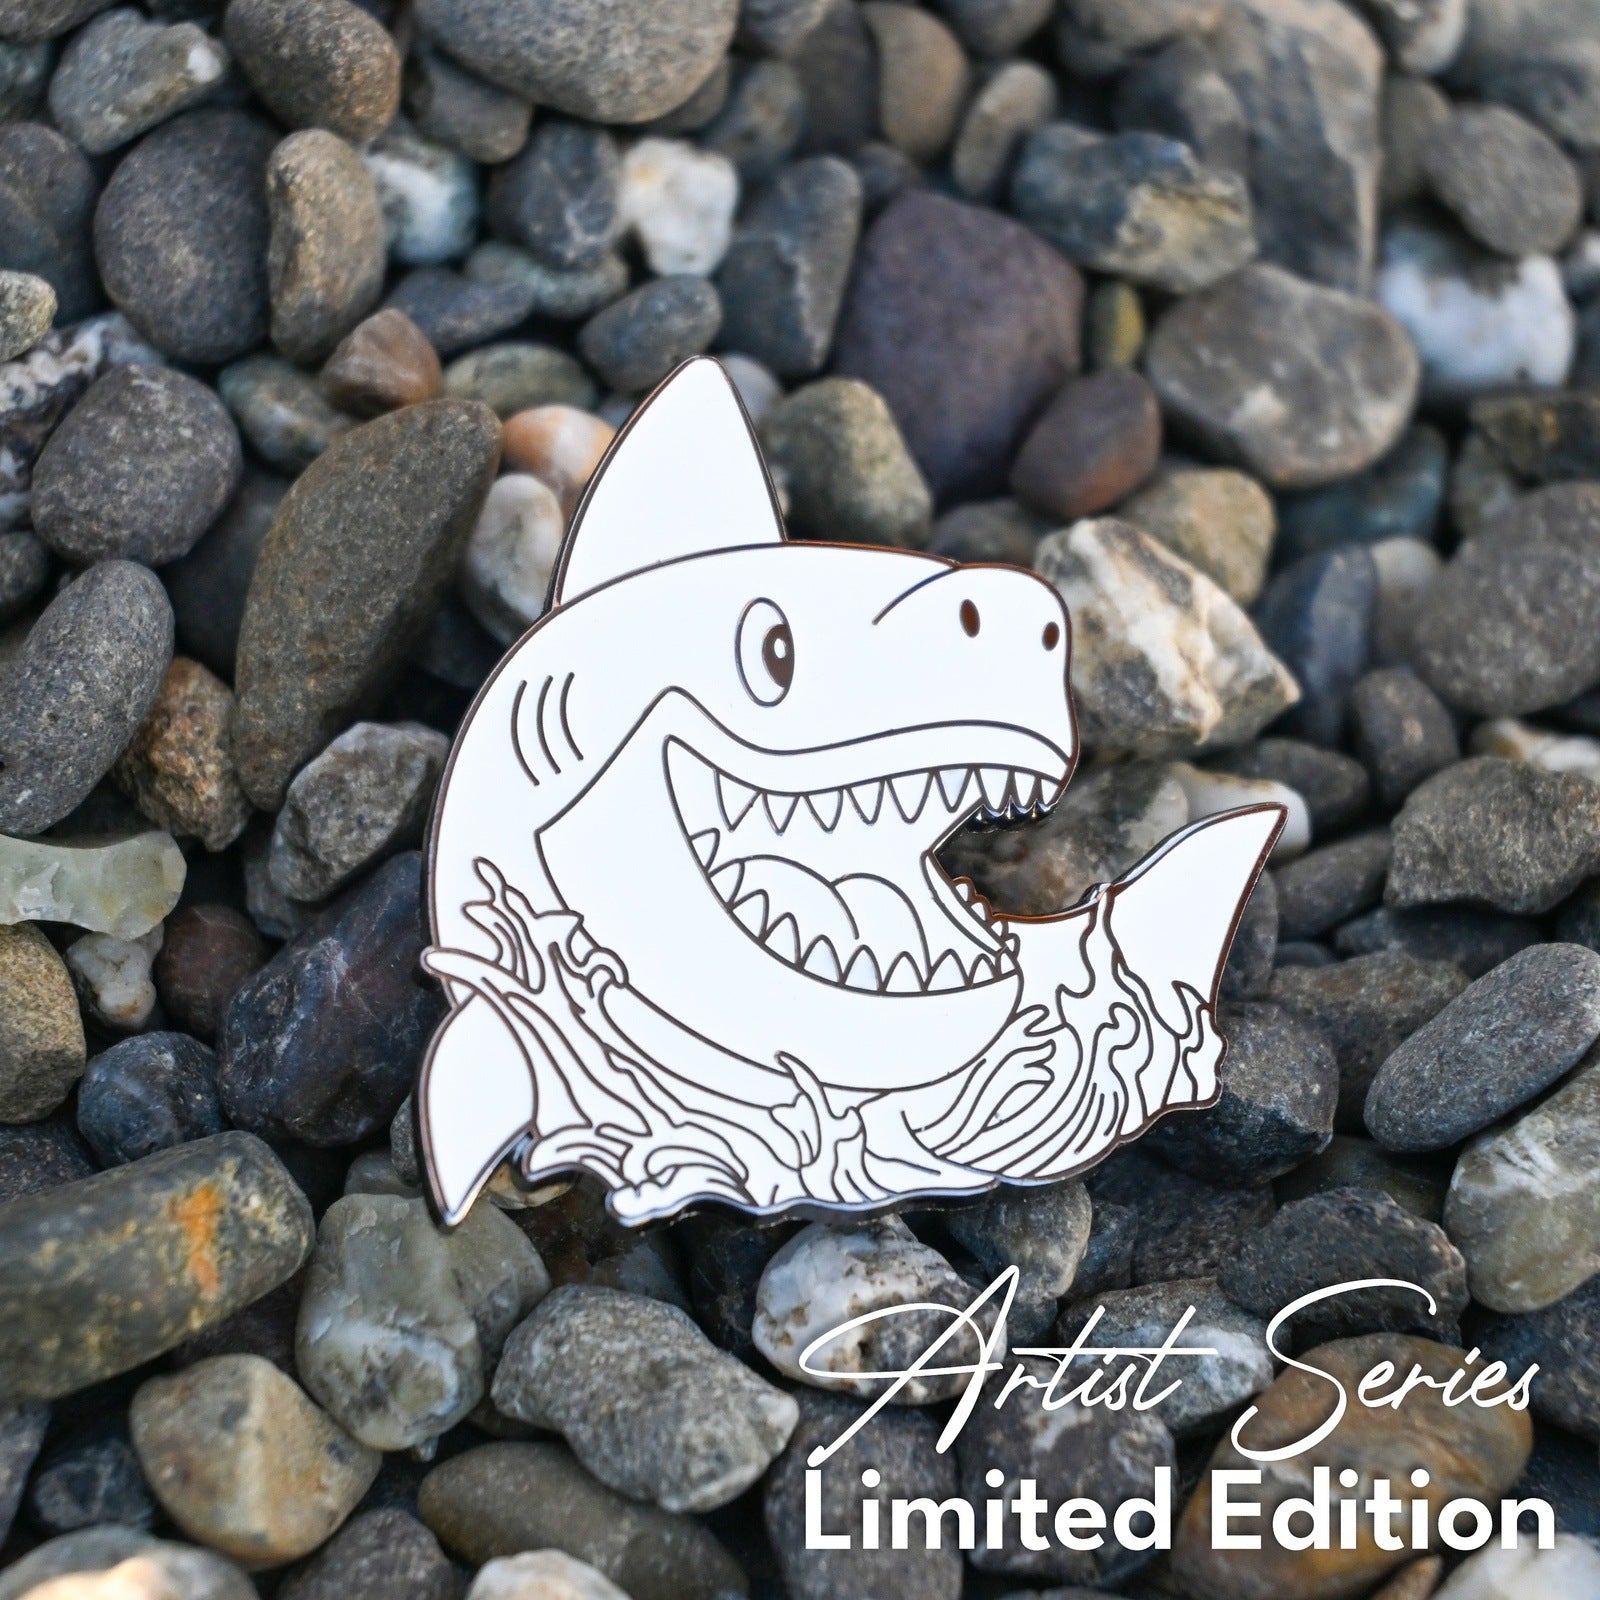 Arcadia Collectibles Artist Series B&W Shark with Bump-N-Bite Exclusive White Glow - LE 20 - *B Grades*